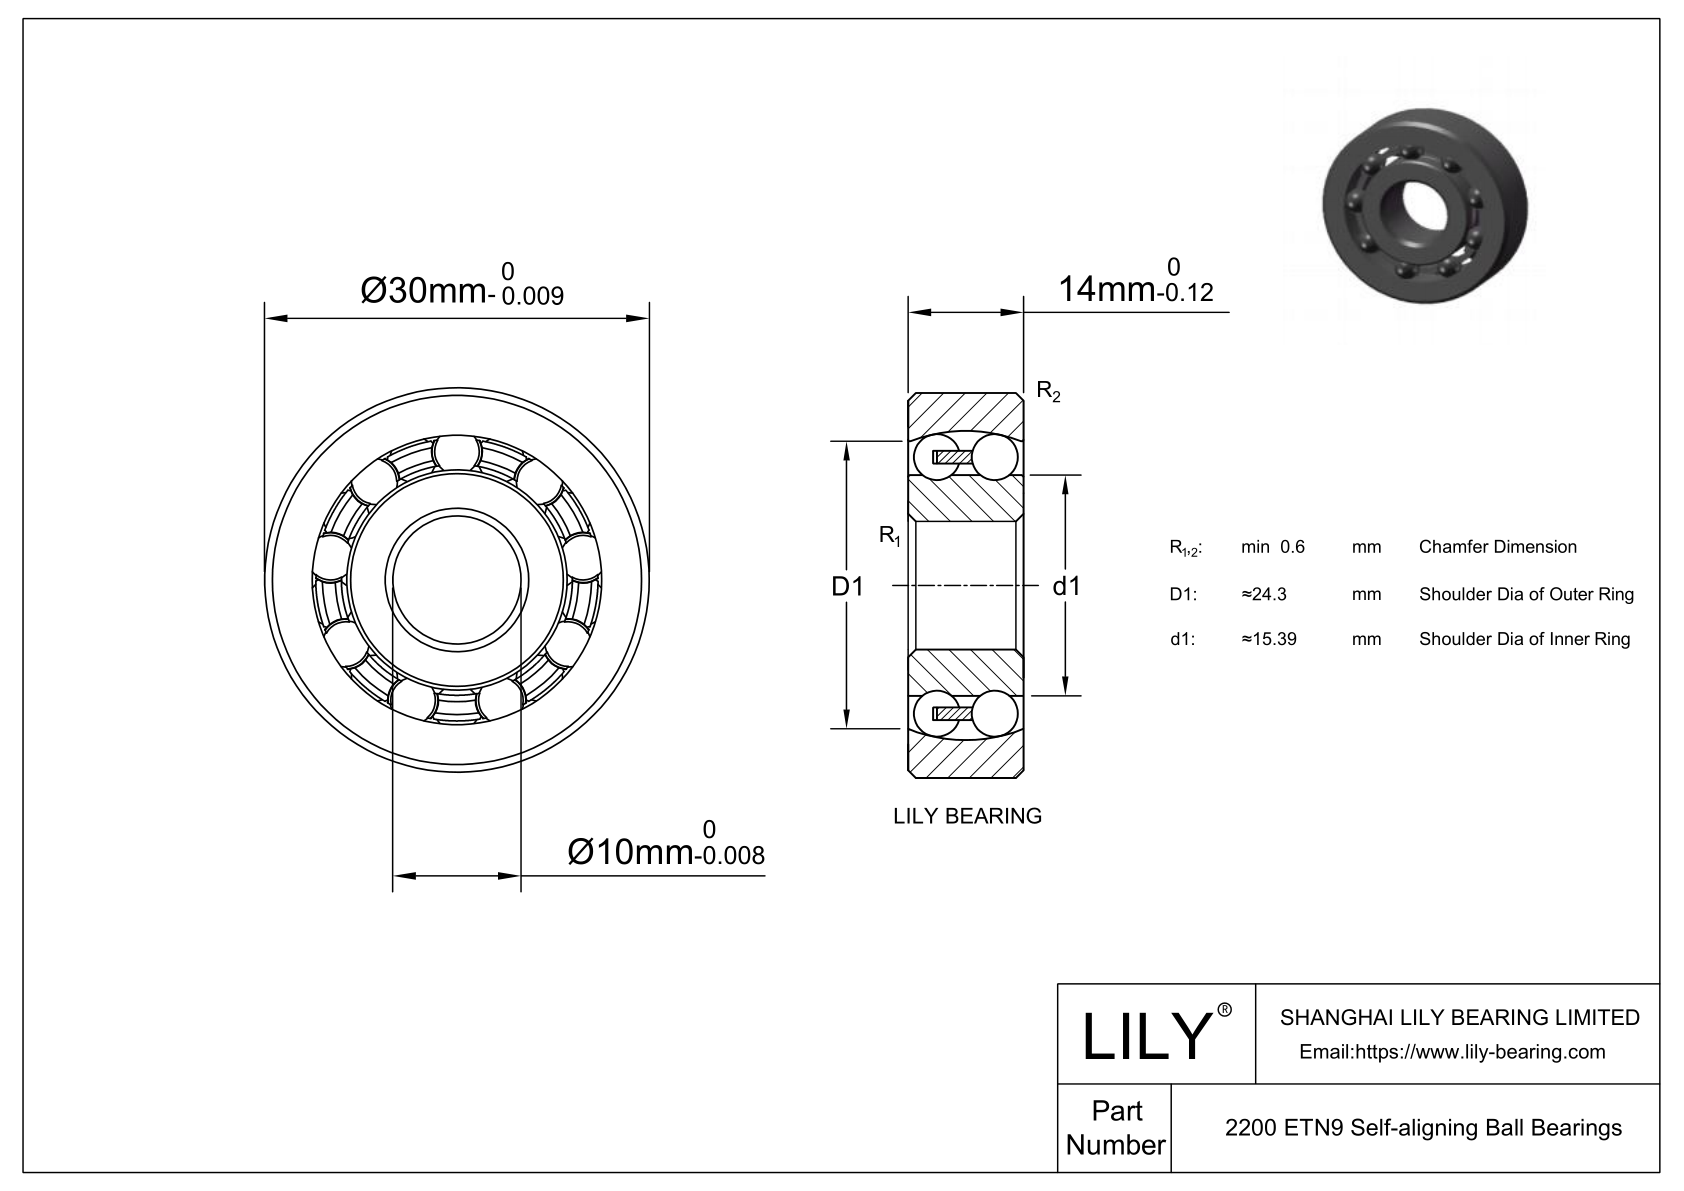 S2200 ETN9 Stainless Steel Self Aligning Ball Bearings cad drawing